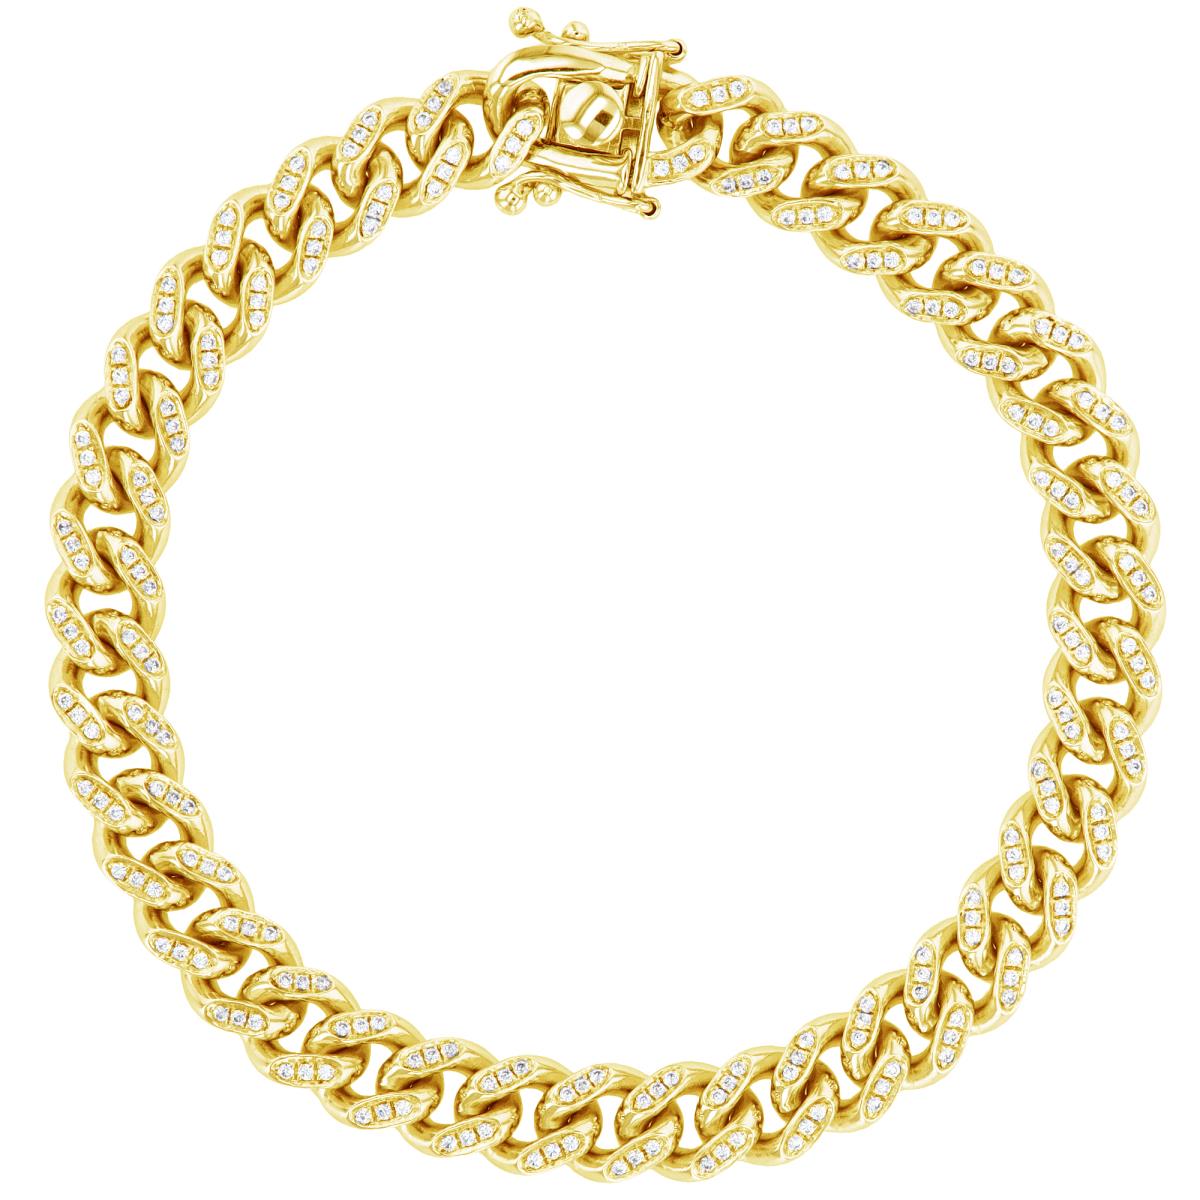 14K Yellow Gold 0.90CTTW Diamond Pave 6mm Solid Miami Cuban 180 8.5" Chain Bracelet With Box Lock